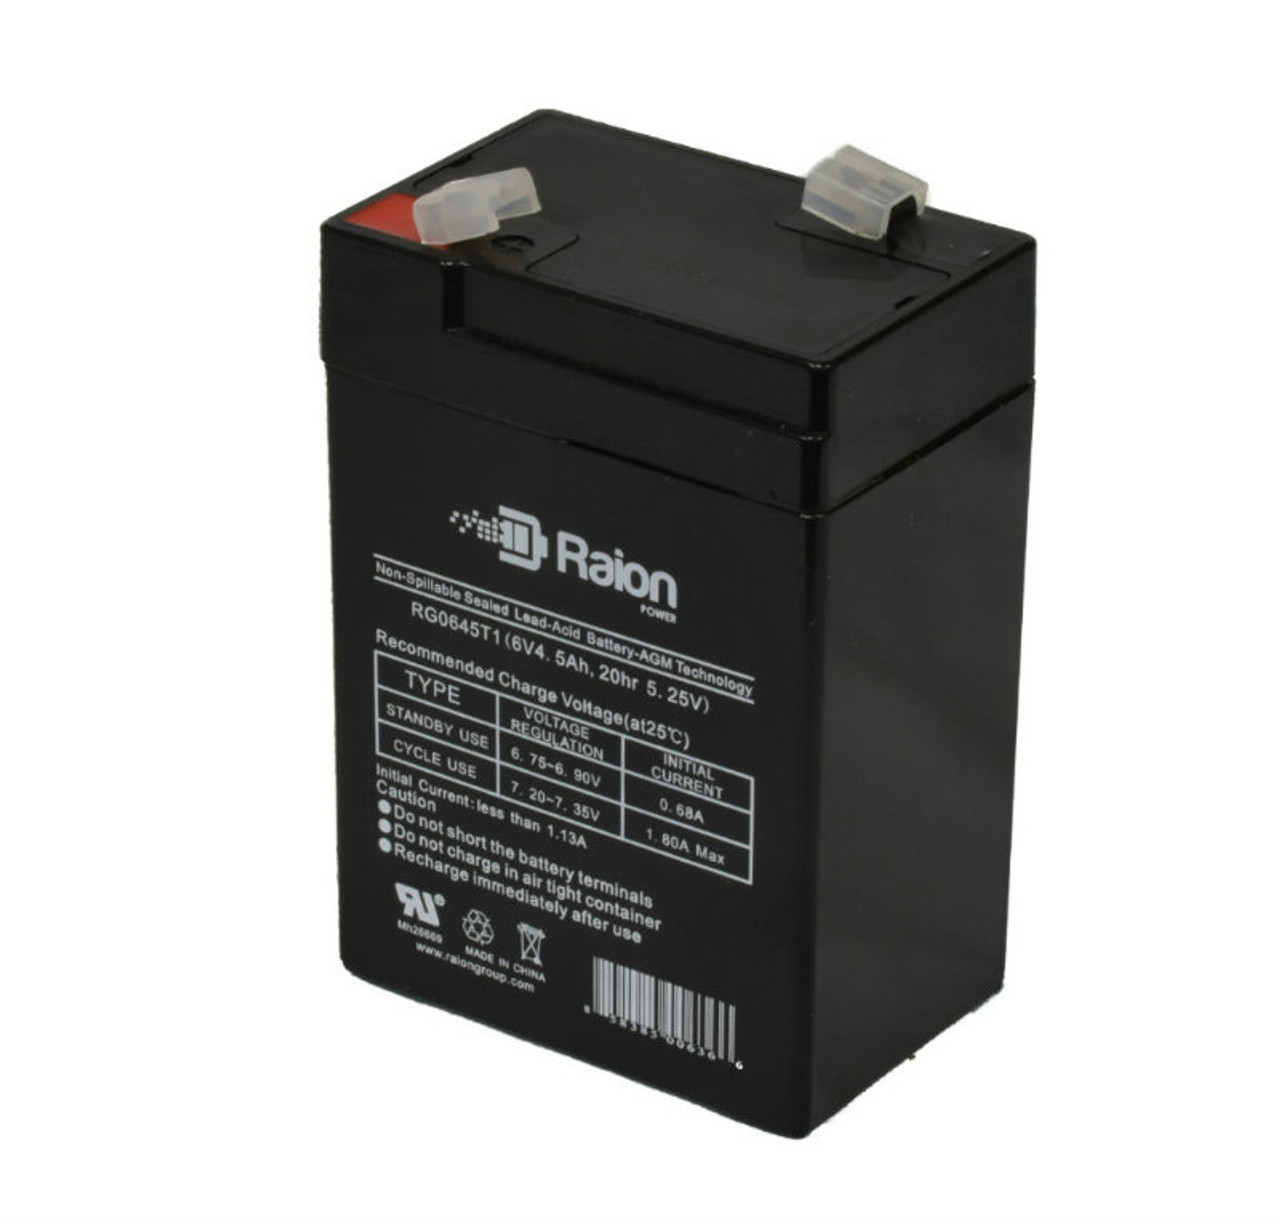 Raion Power RG0645T1 6V 4.5Ah Replacement Battery Cartridge for Sure-Lites 262